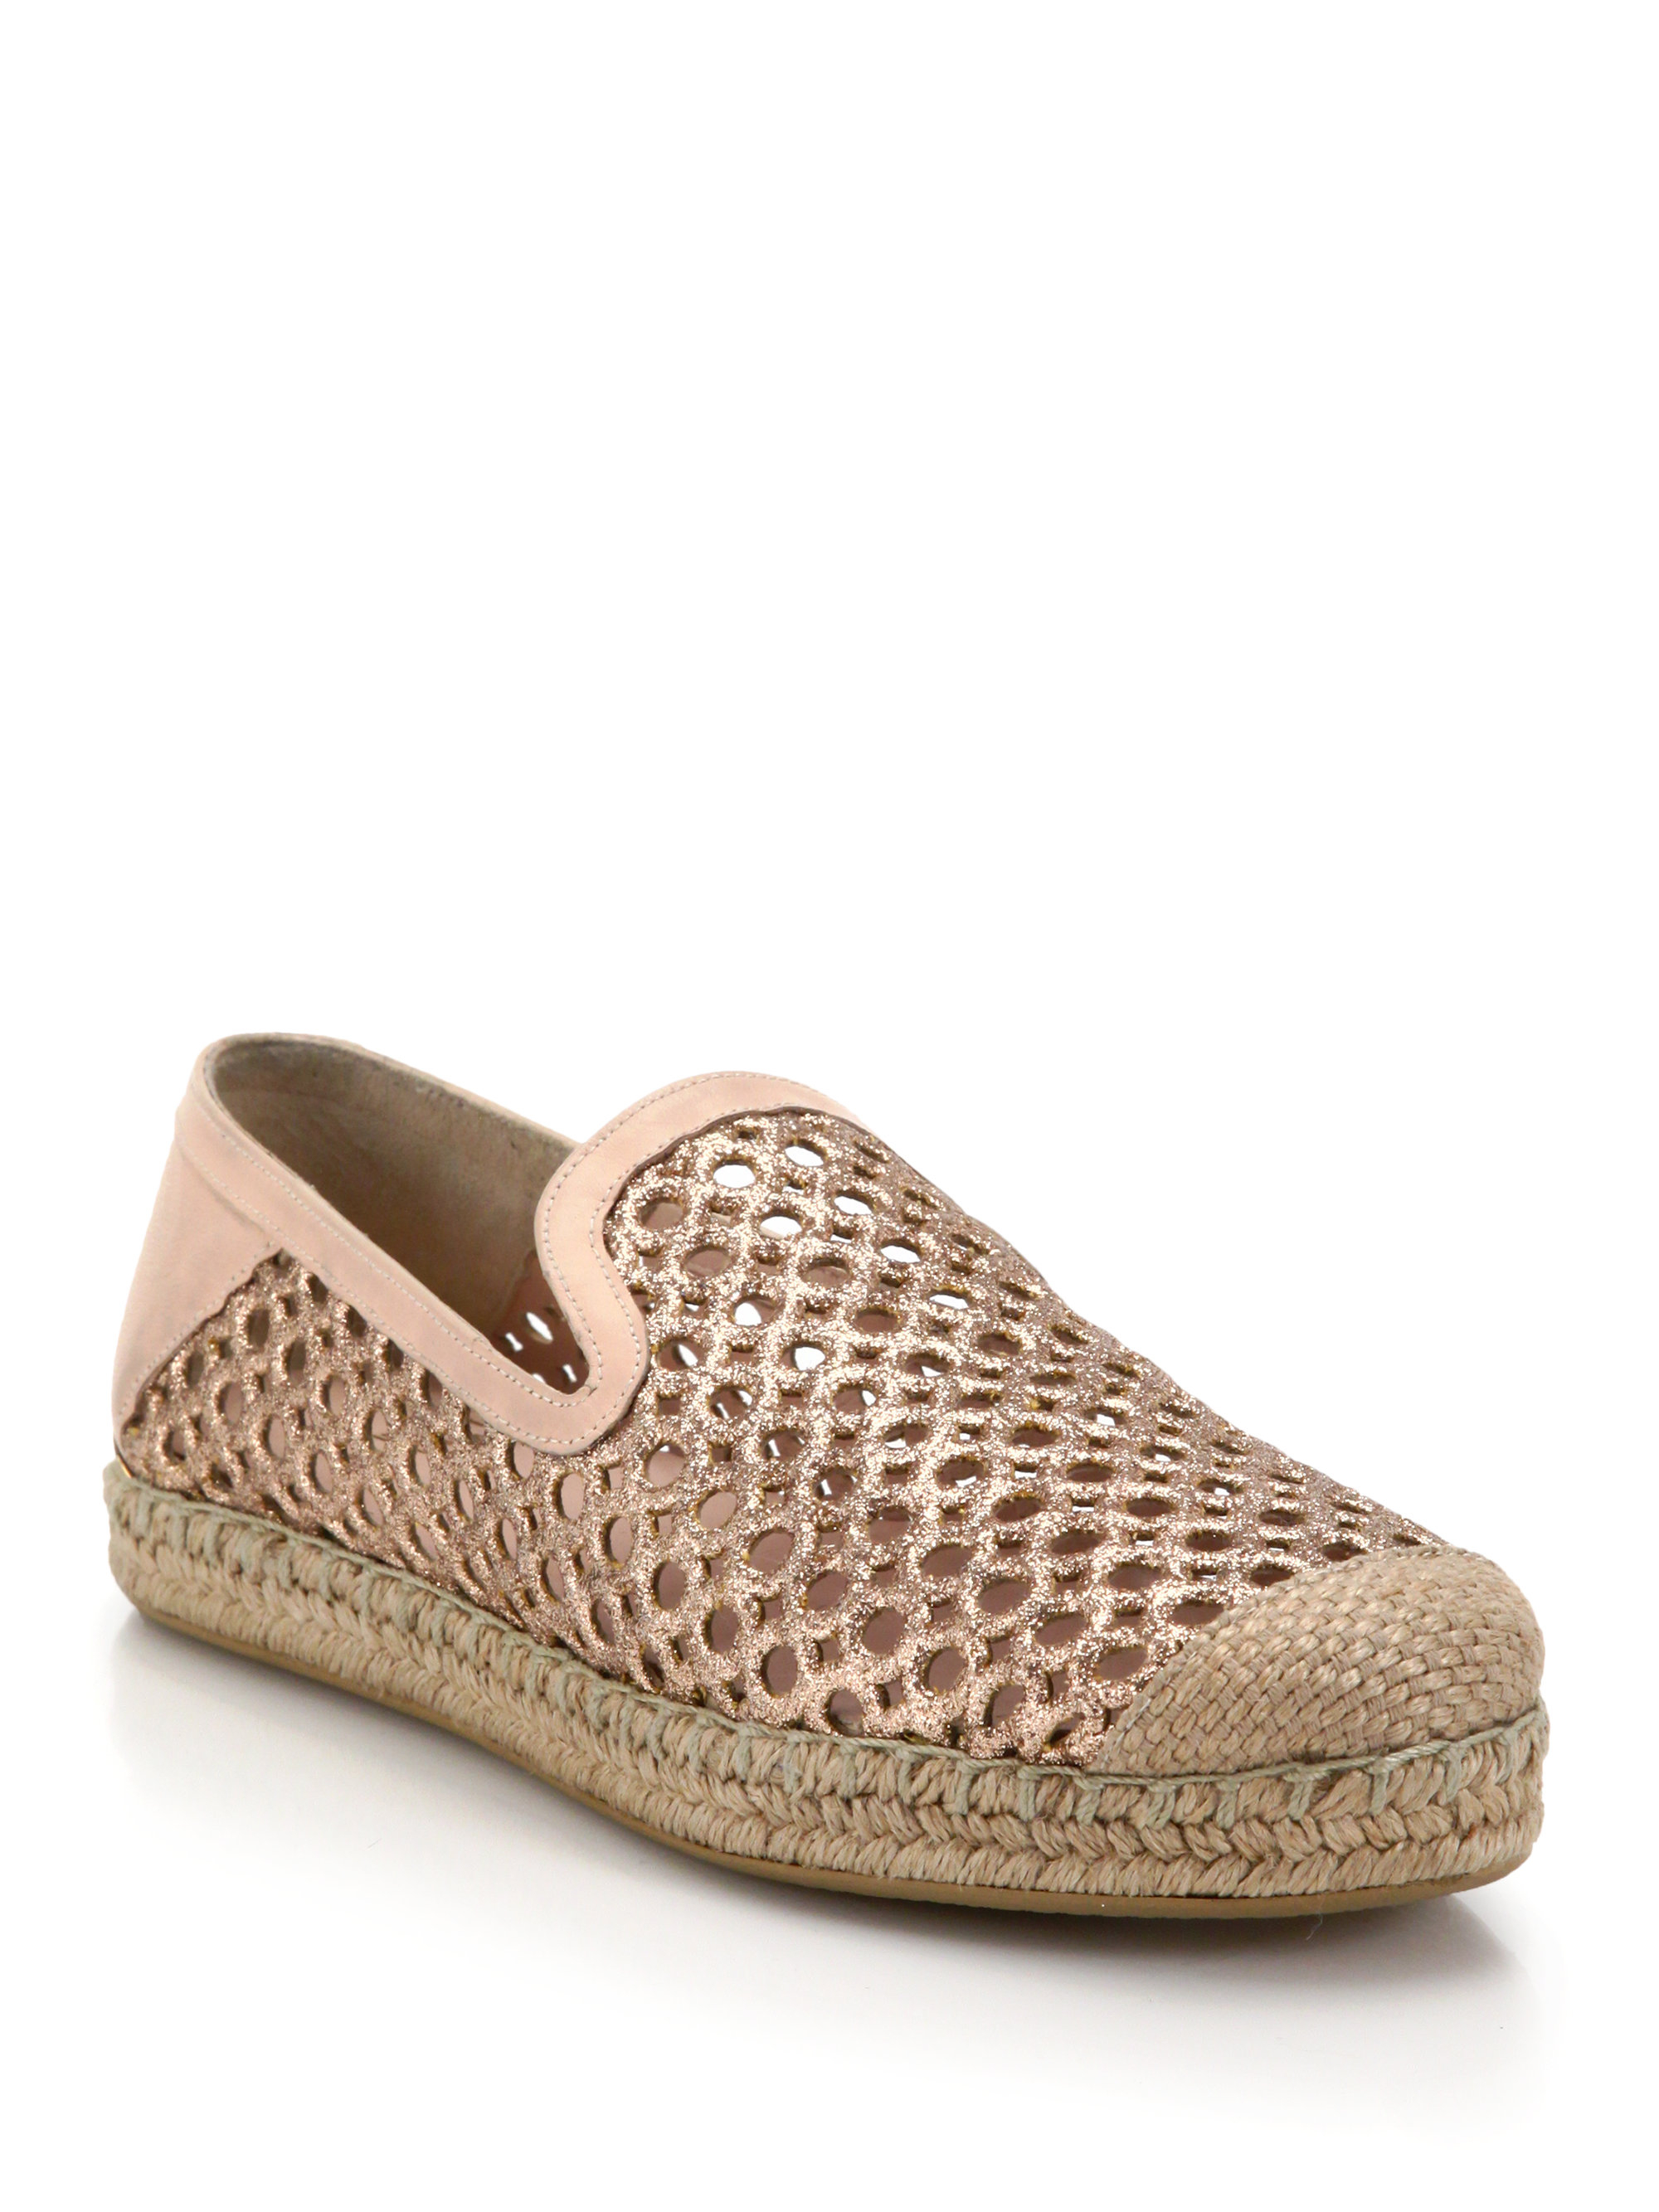 Lyst - Stuart weitzman Perforated Glittered Leather Espadrilles in Natural